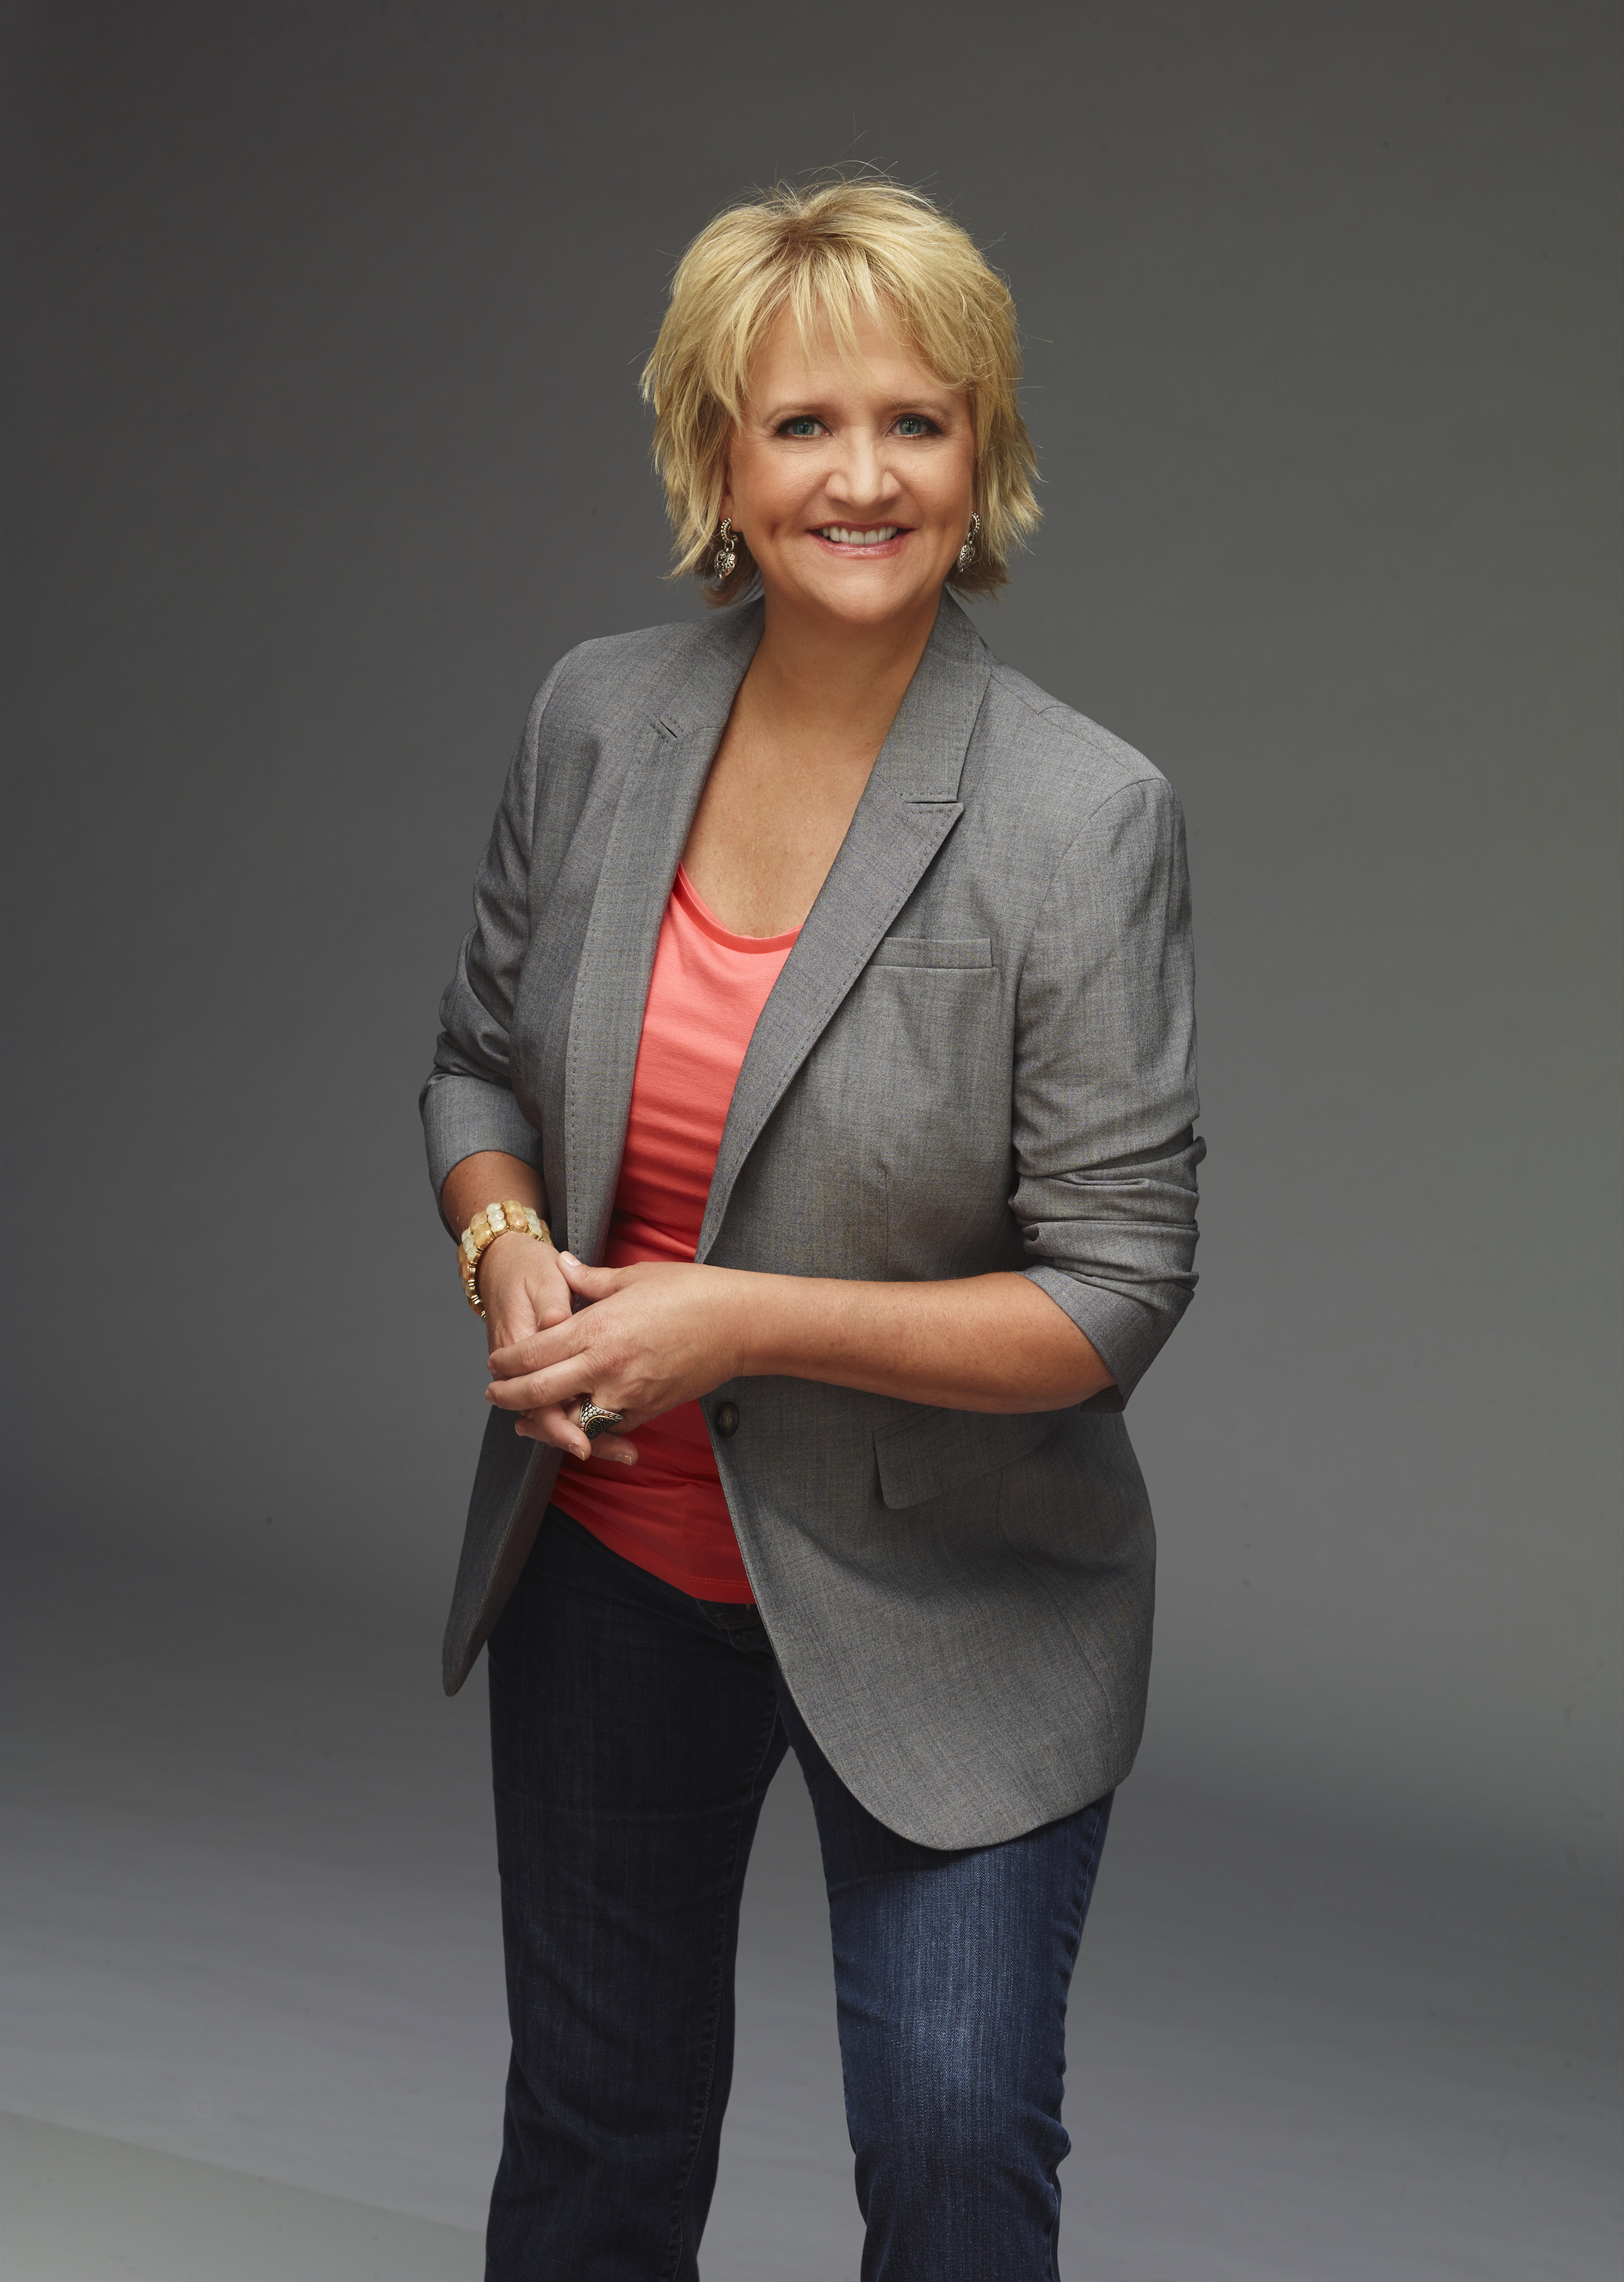 JBU Welcomes 'Learning to Laugh Again' with Chonda Pierce